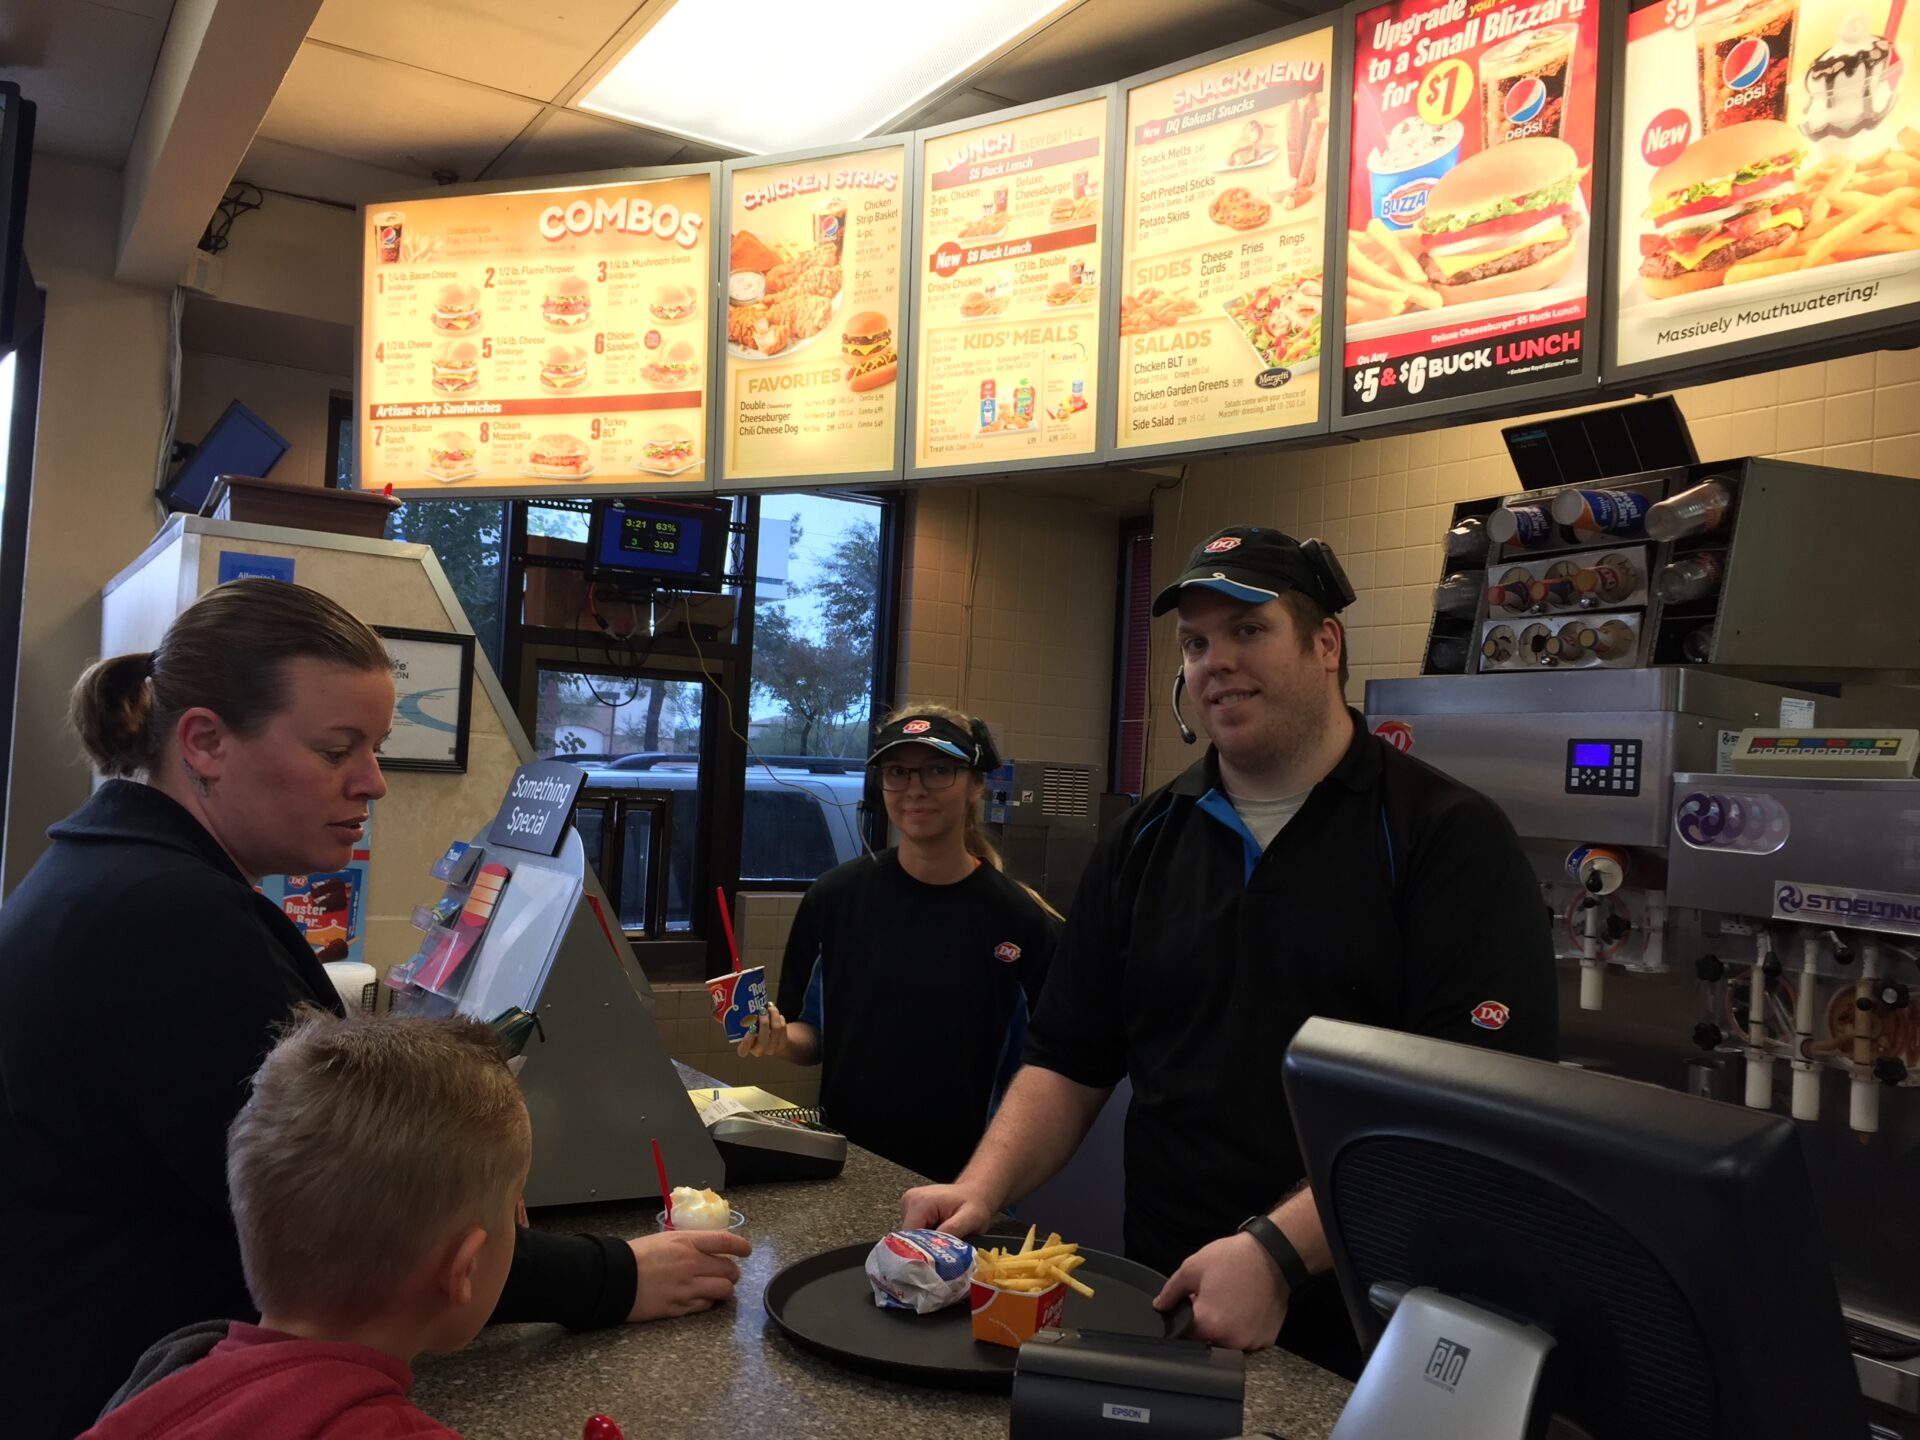 The last day of local schools' winter break found Michelle Dunlap and son Ethan awaiting the family's order of chicken baskets and cheeseburgers followed by a sweet treat at Dairy Queen's Rural and Elliot roads location. Manager Andy Beatty says the well-known, memory-inducing international food chain is expanding its presence in this area. 